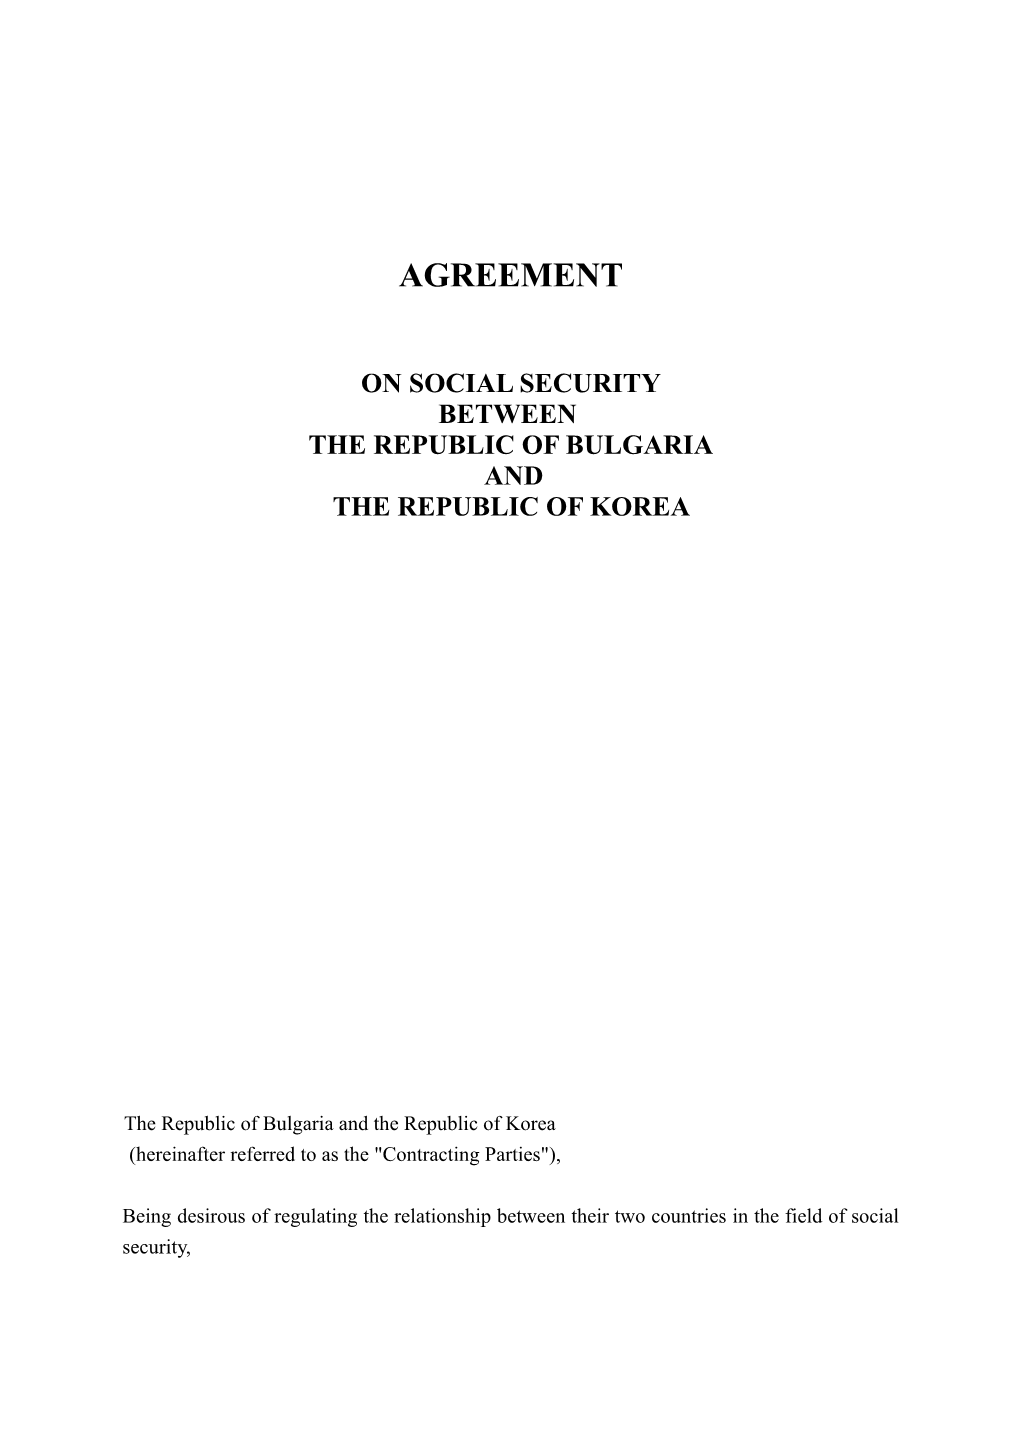 Agreement on Social Security Between the Republic of Korea and the Republic of Bulgaria